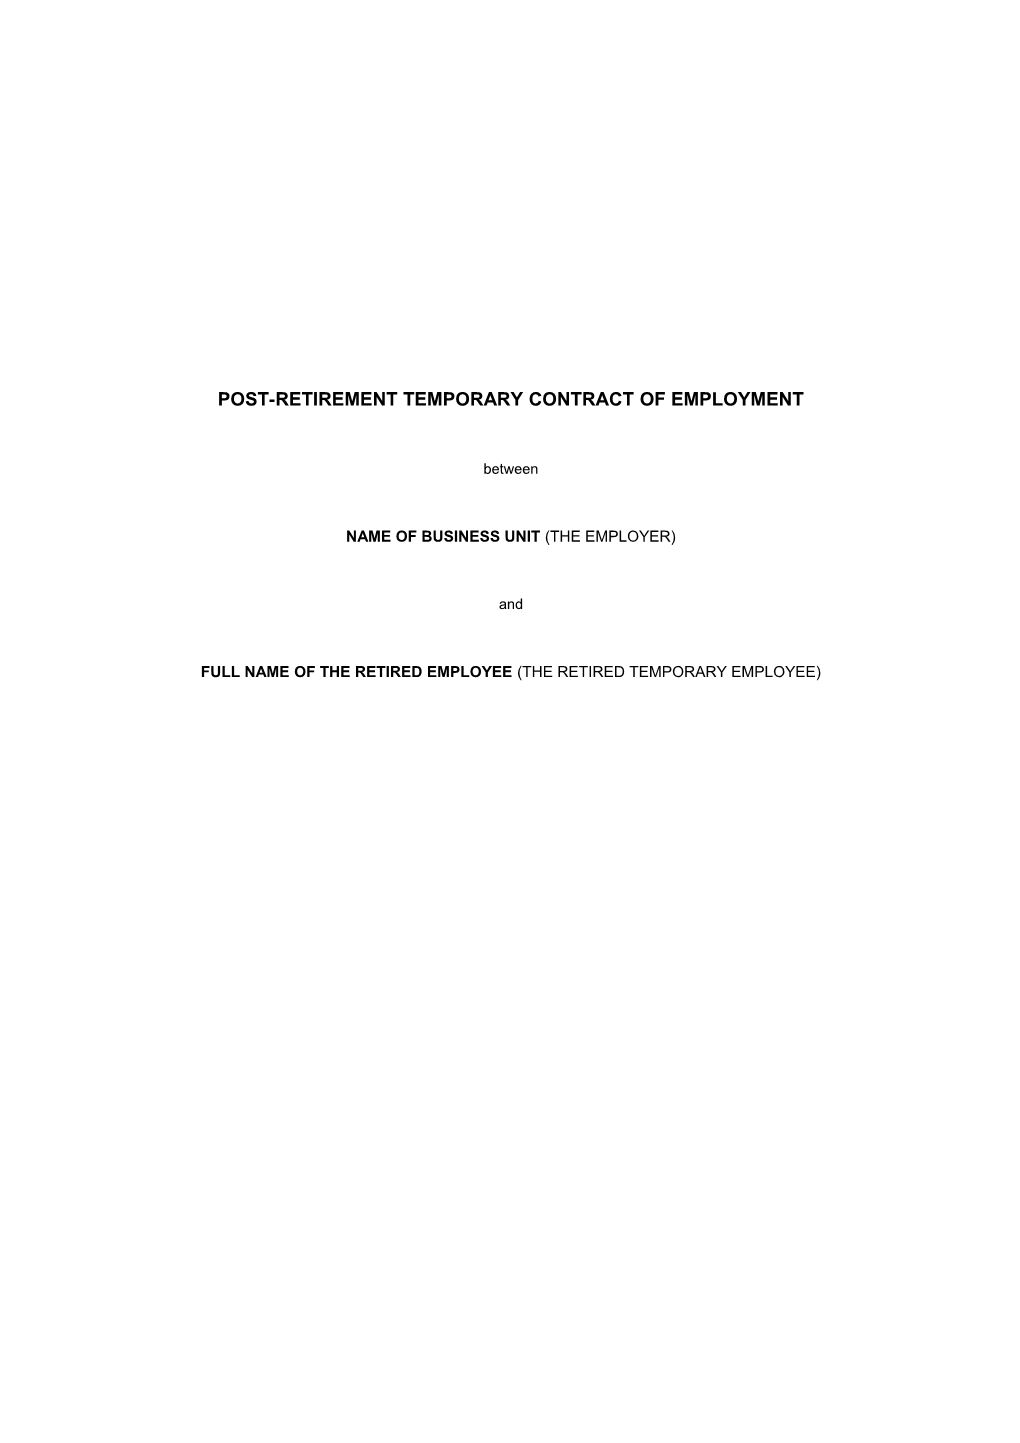 Post-Retirement Temporarycontract of Employment